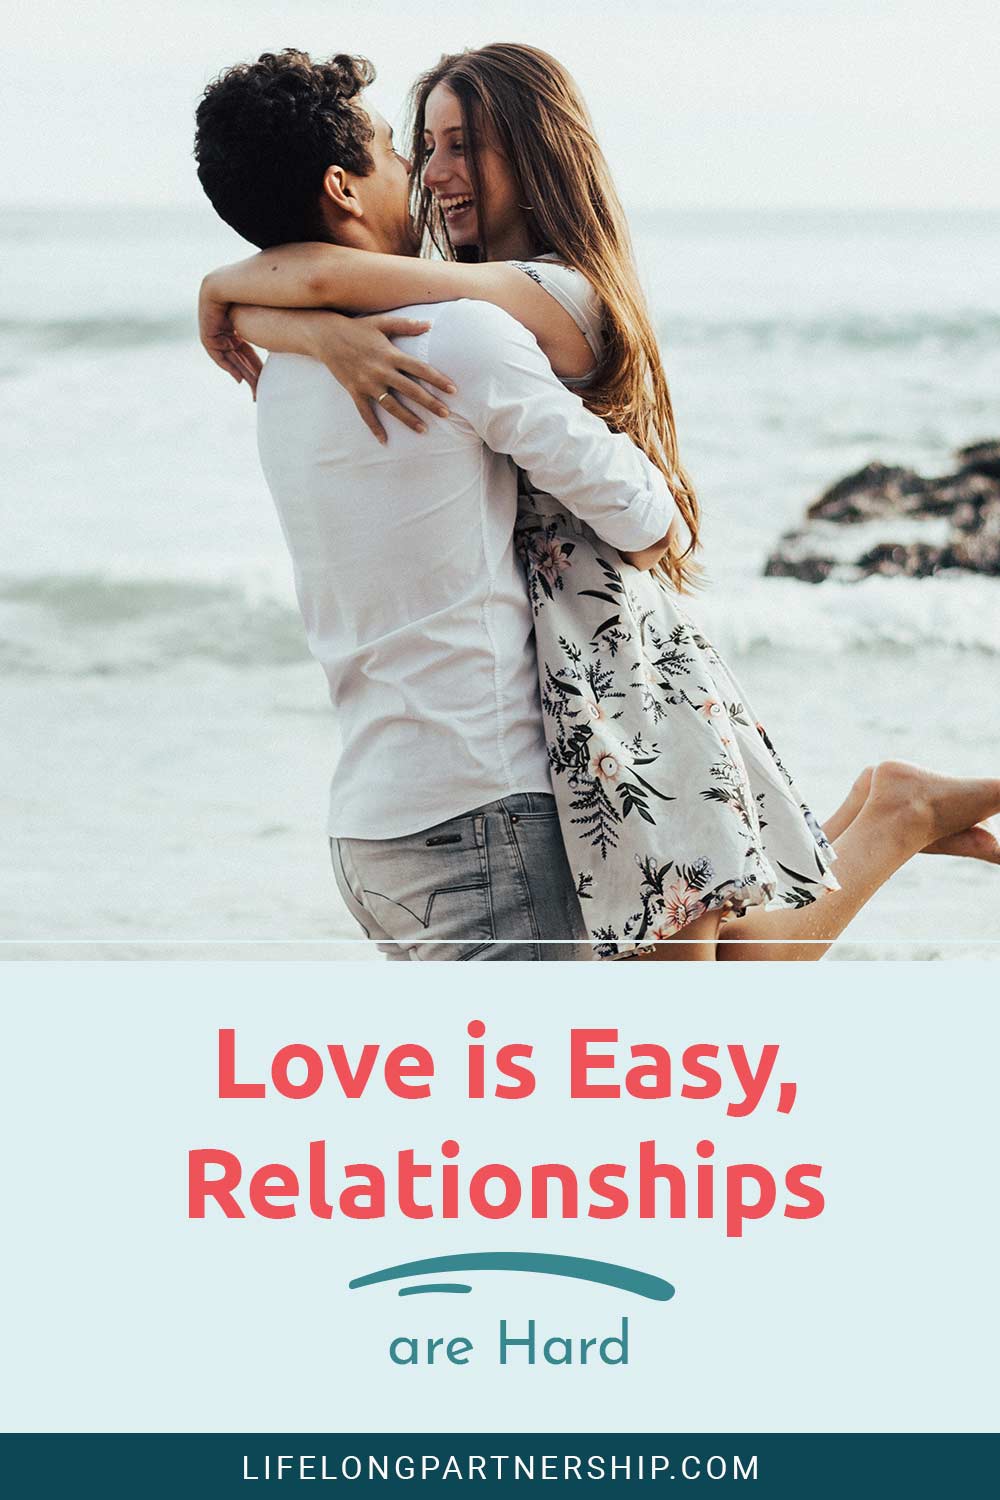 Love is Easy, Relationships are Hard